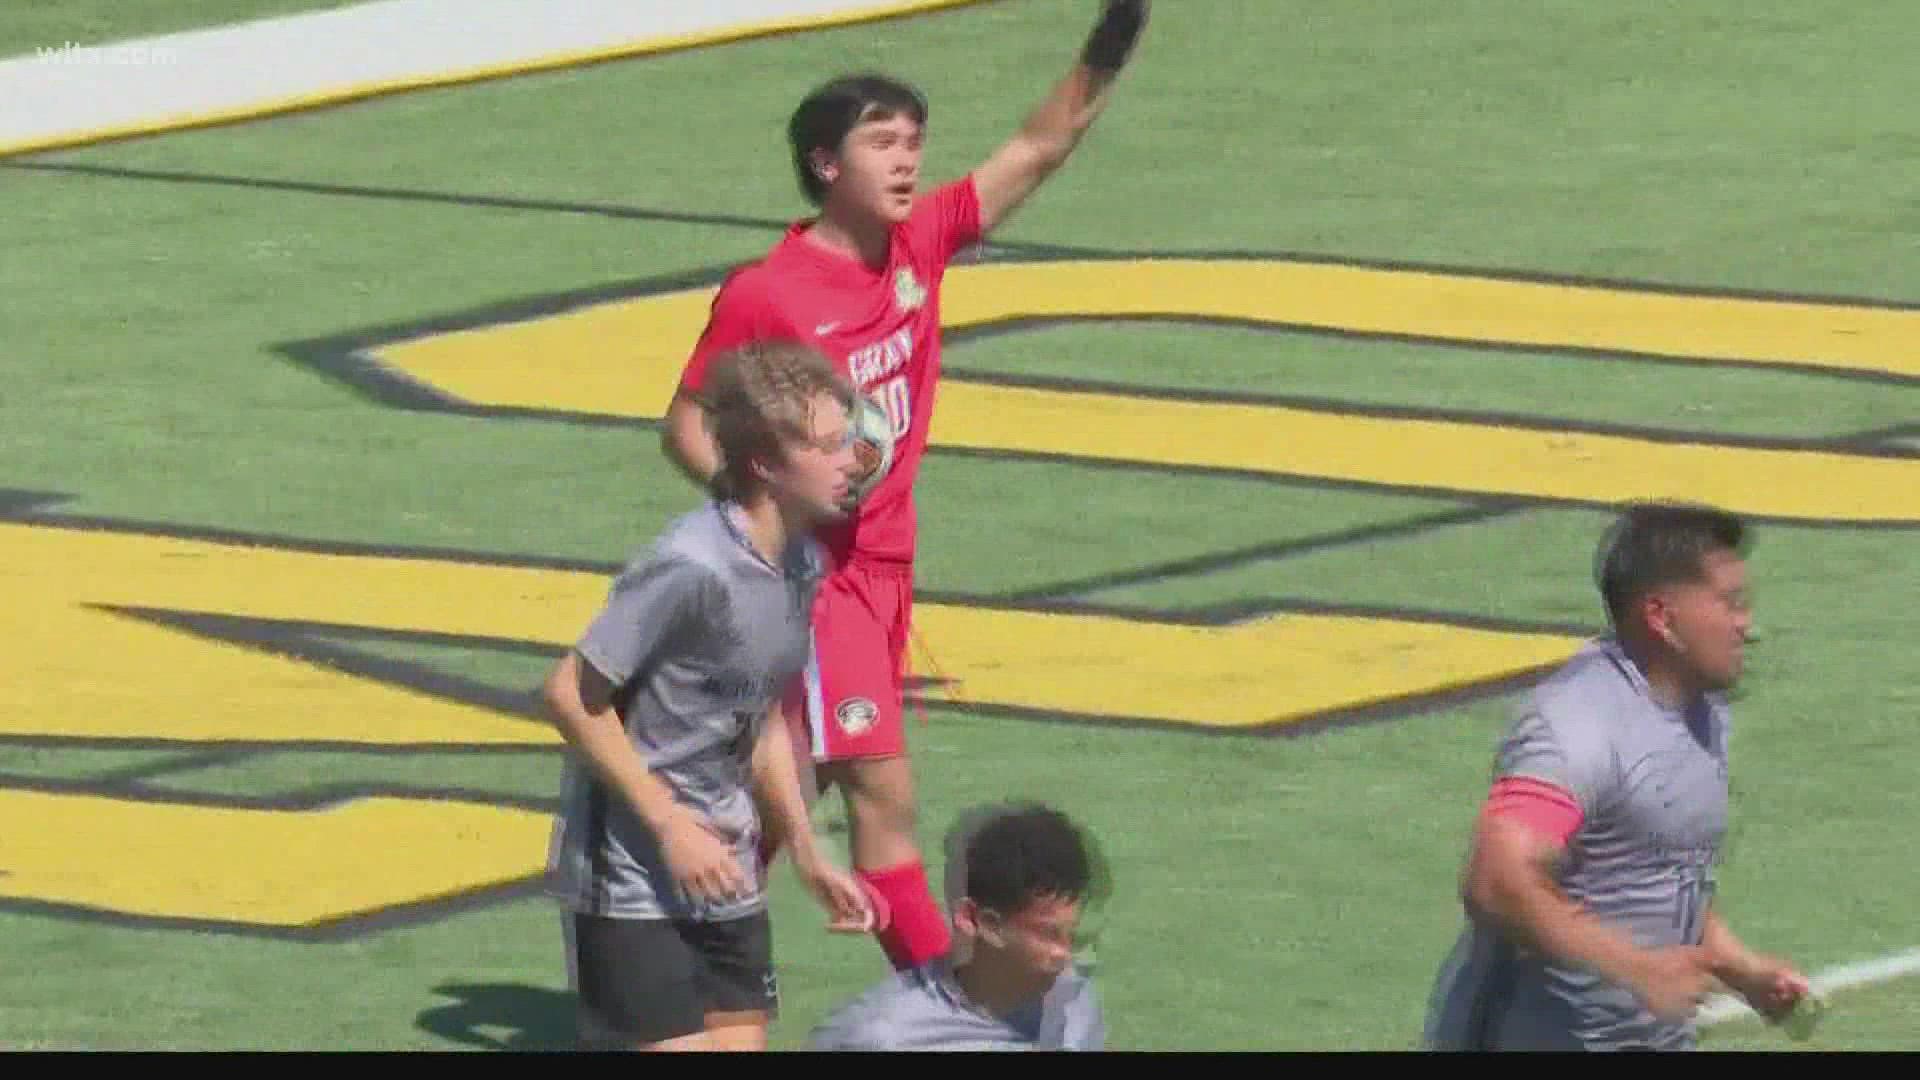 Highlights from the 5A and 2A boys state championships as Riverside defeated Chapin 2-1 and Christ Church defeated Gray Collegiate Academy 2-0.